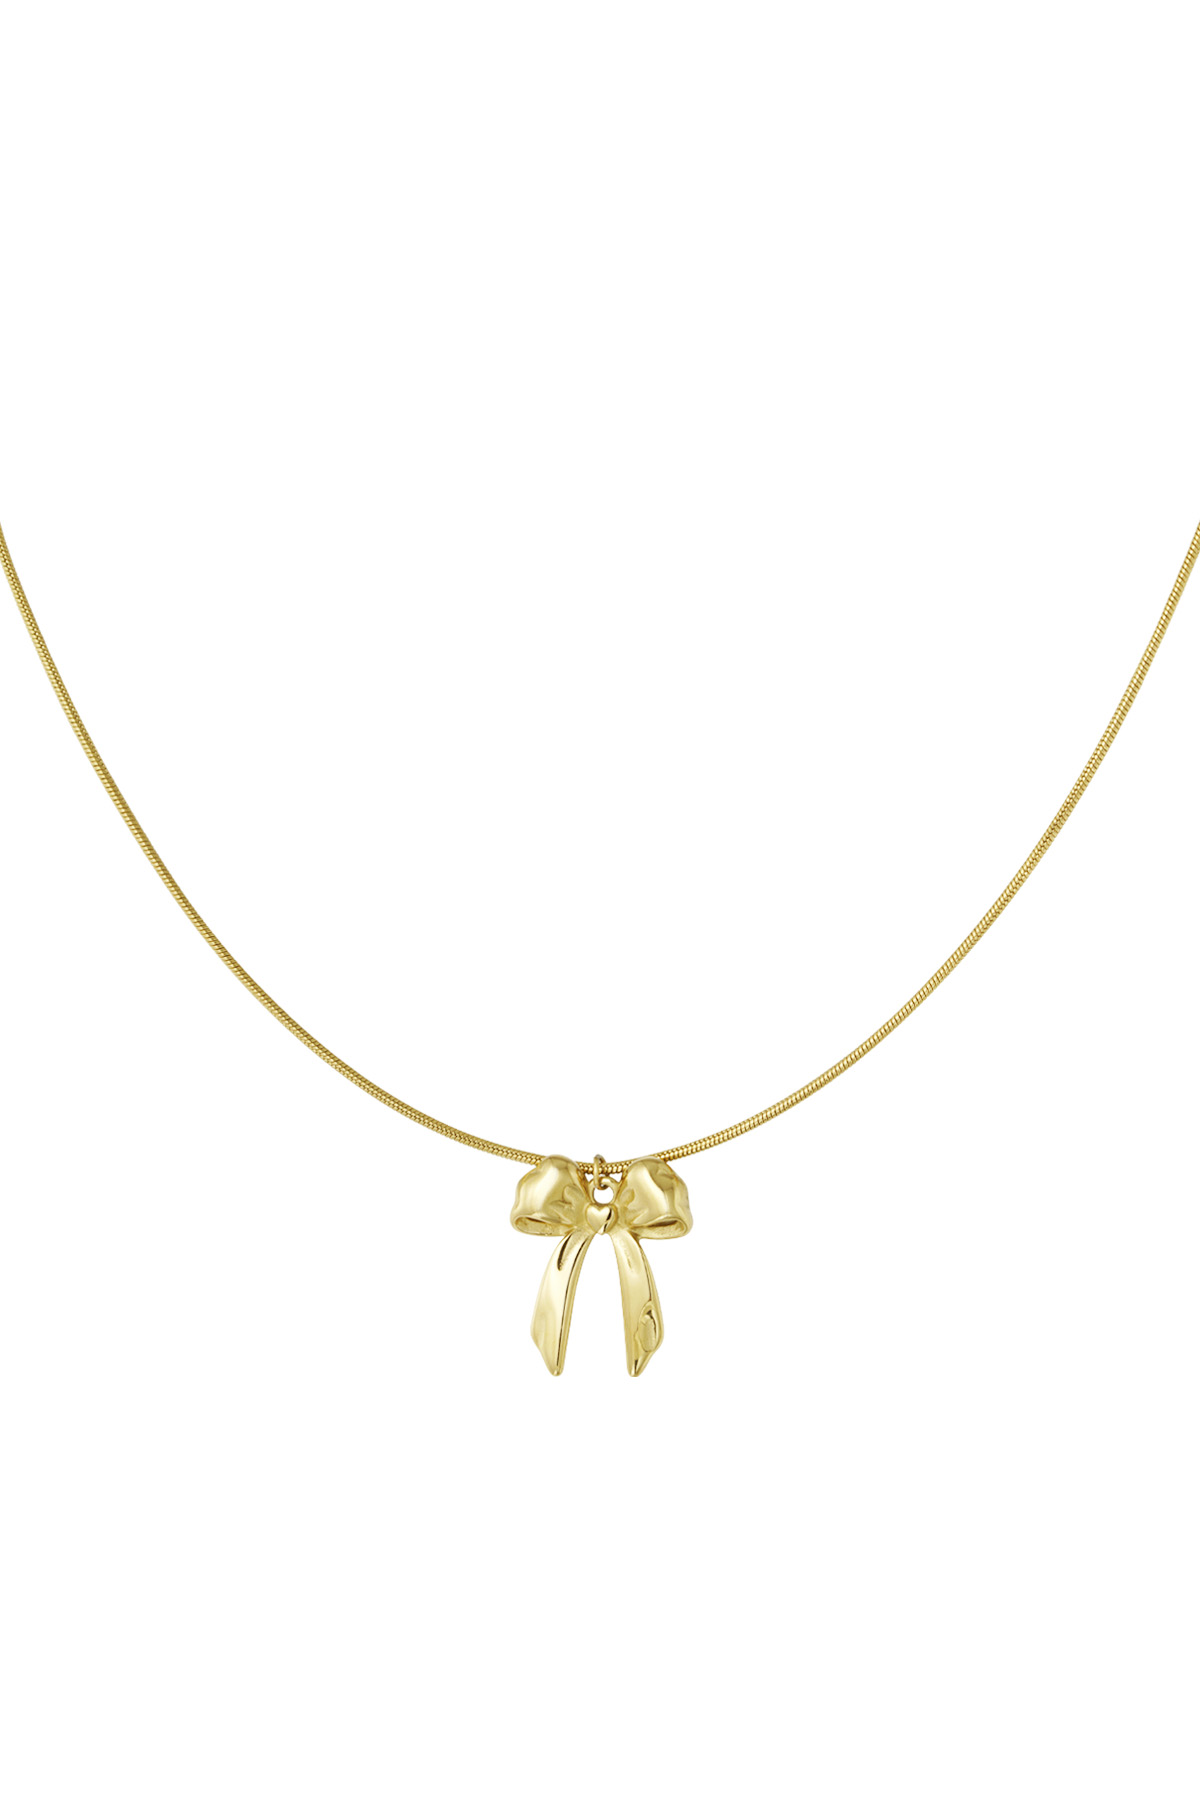 Classic necklace with large bow - gold 